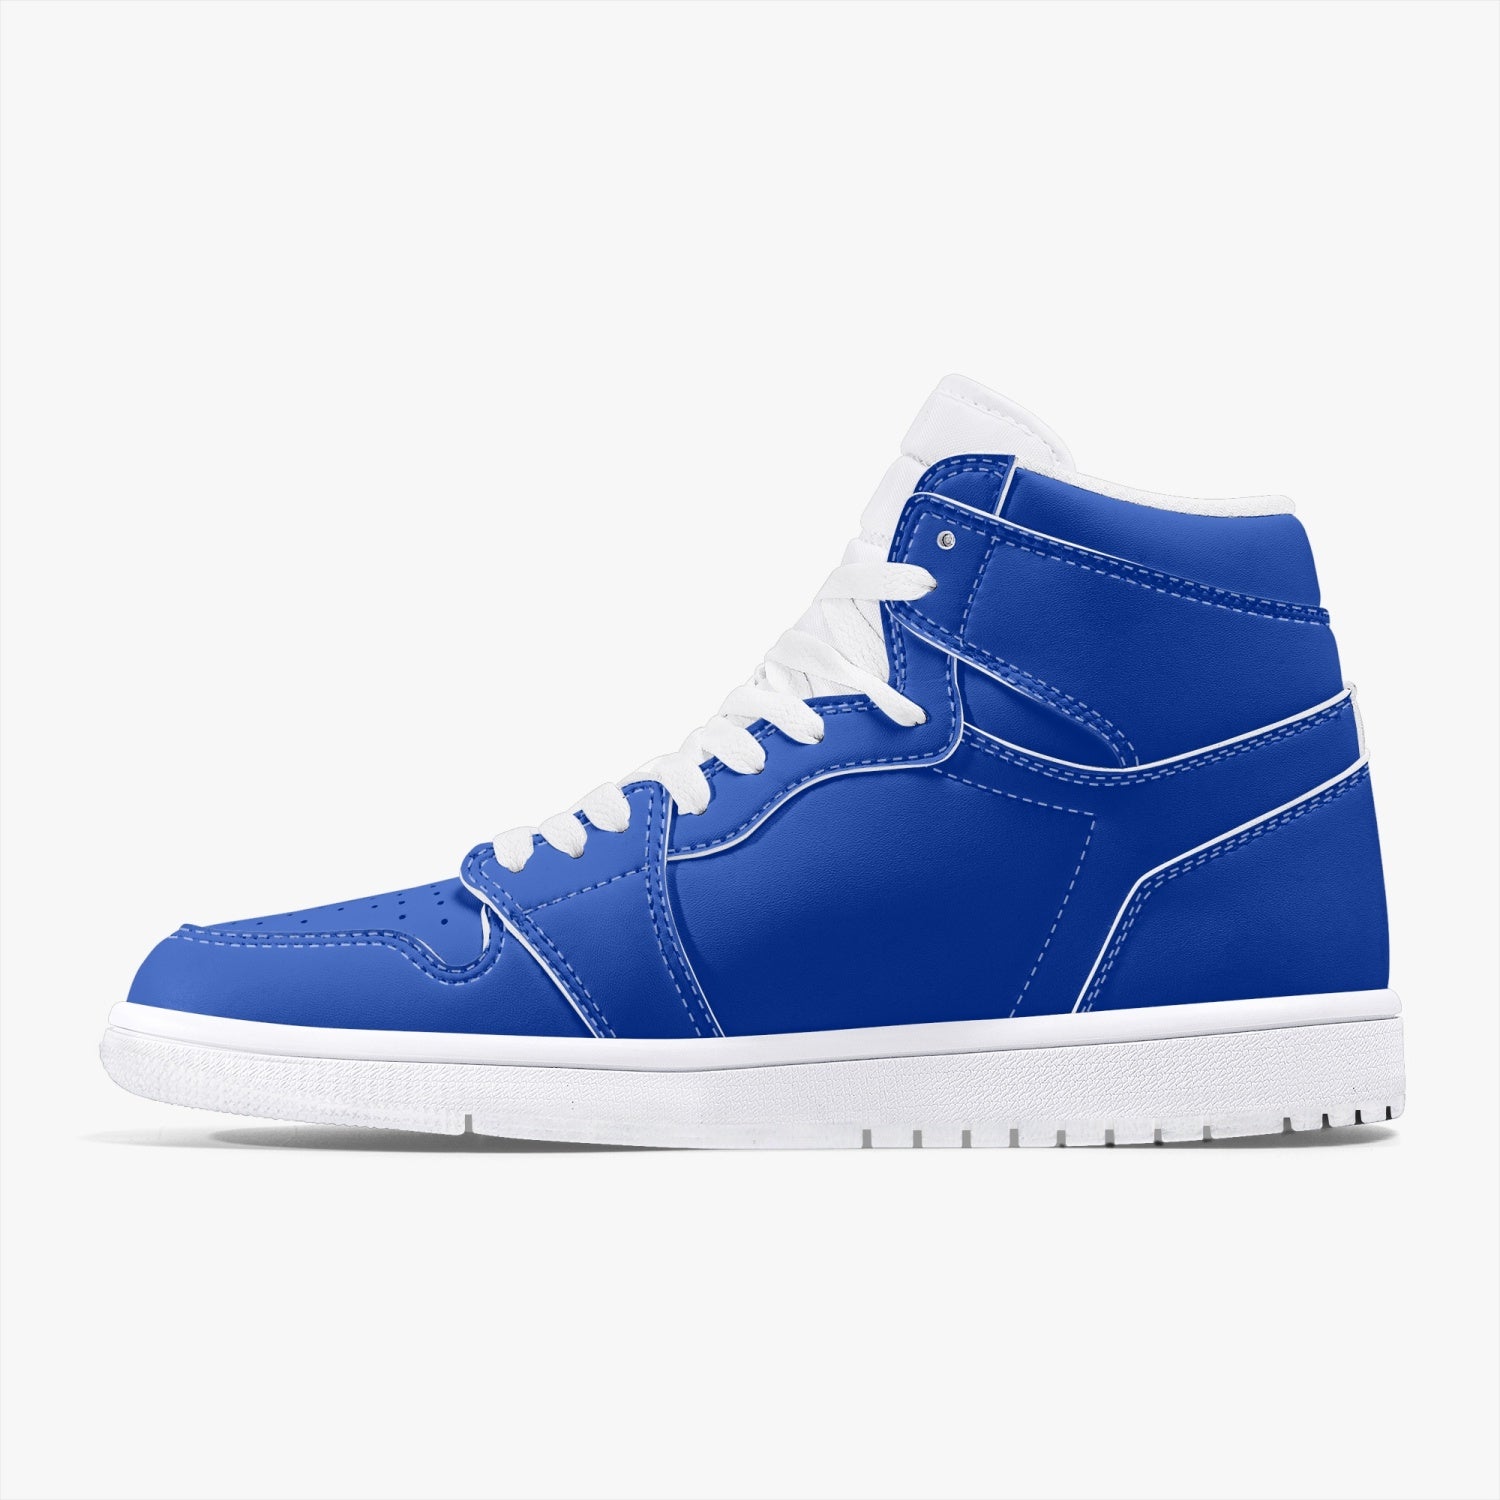 Israel Colors High-Top Sneakers left white